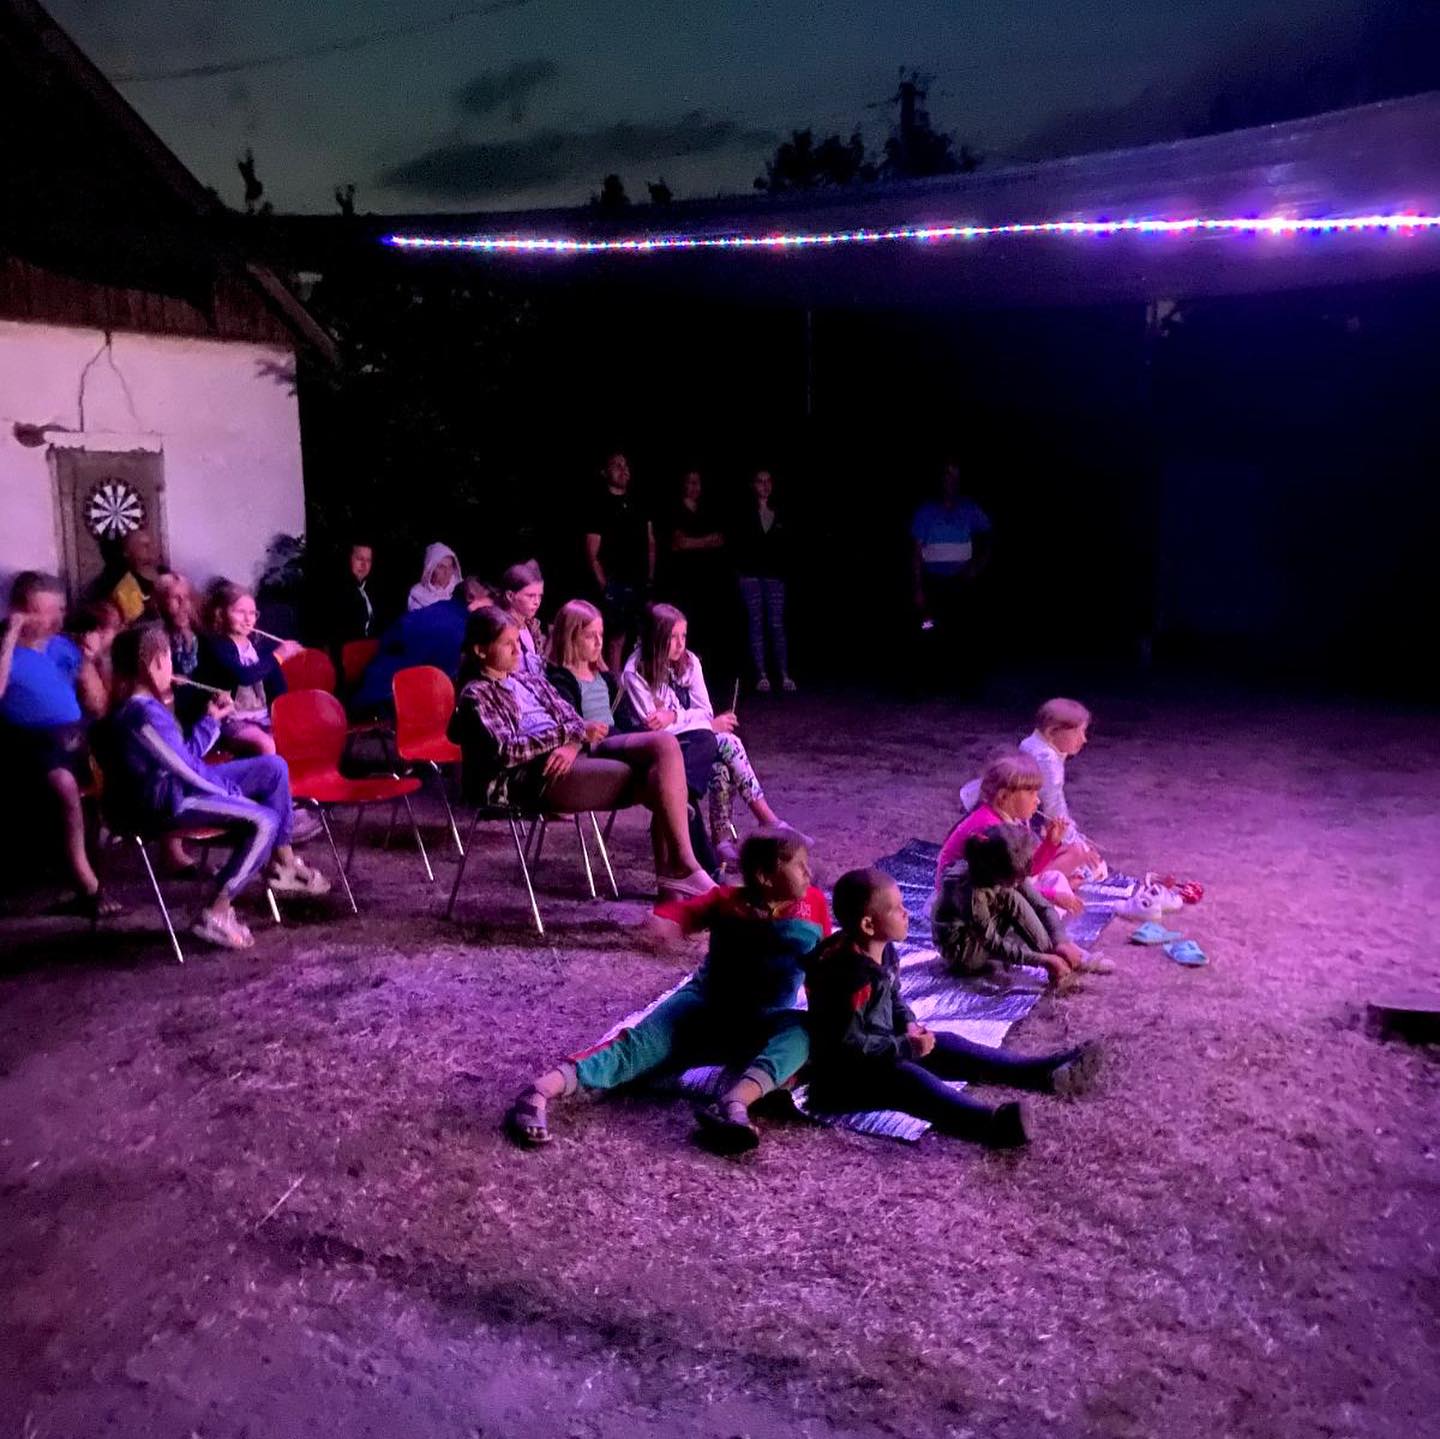 A group of people sitting on chairs in a field at night.